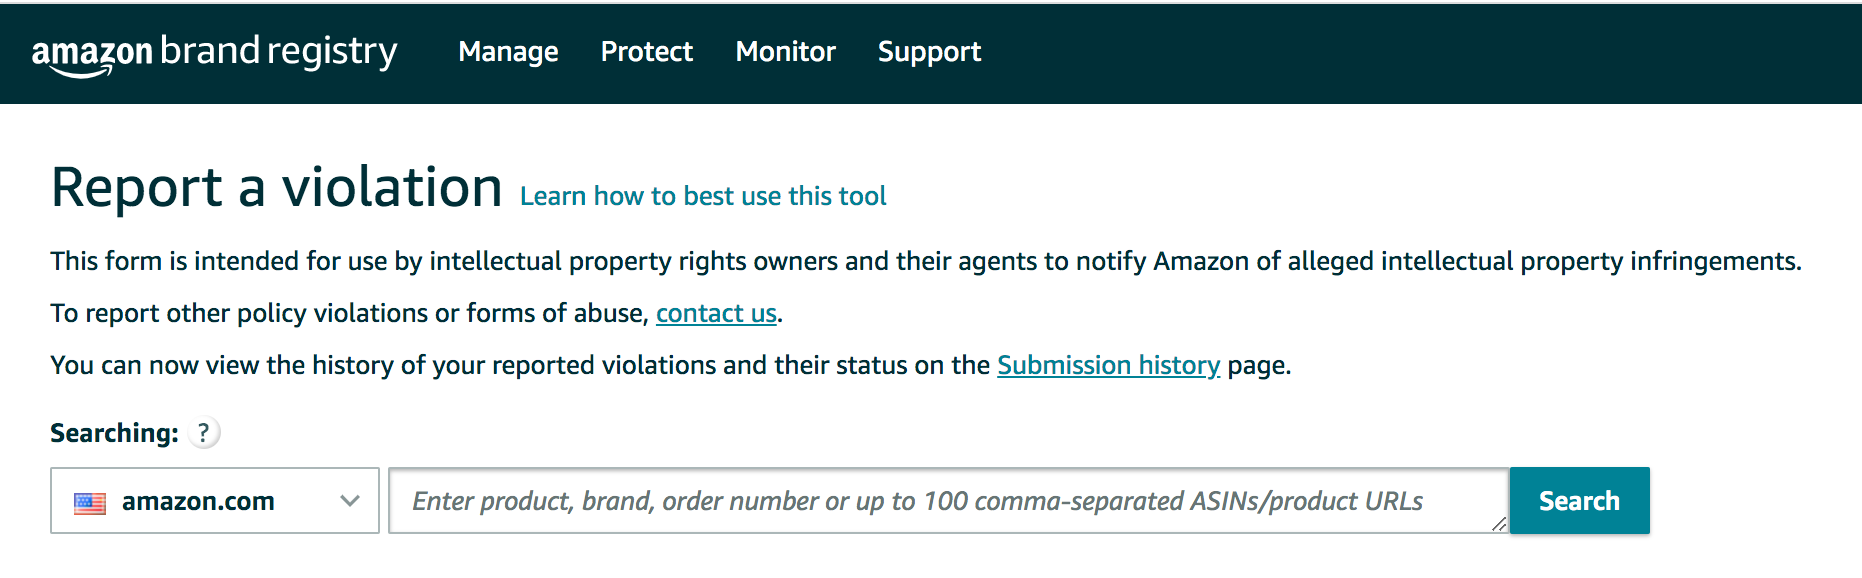 IF you are brand registered, just go directly to Amazon Brand Registry to report a violation.